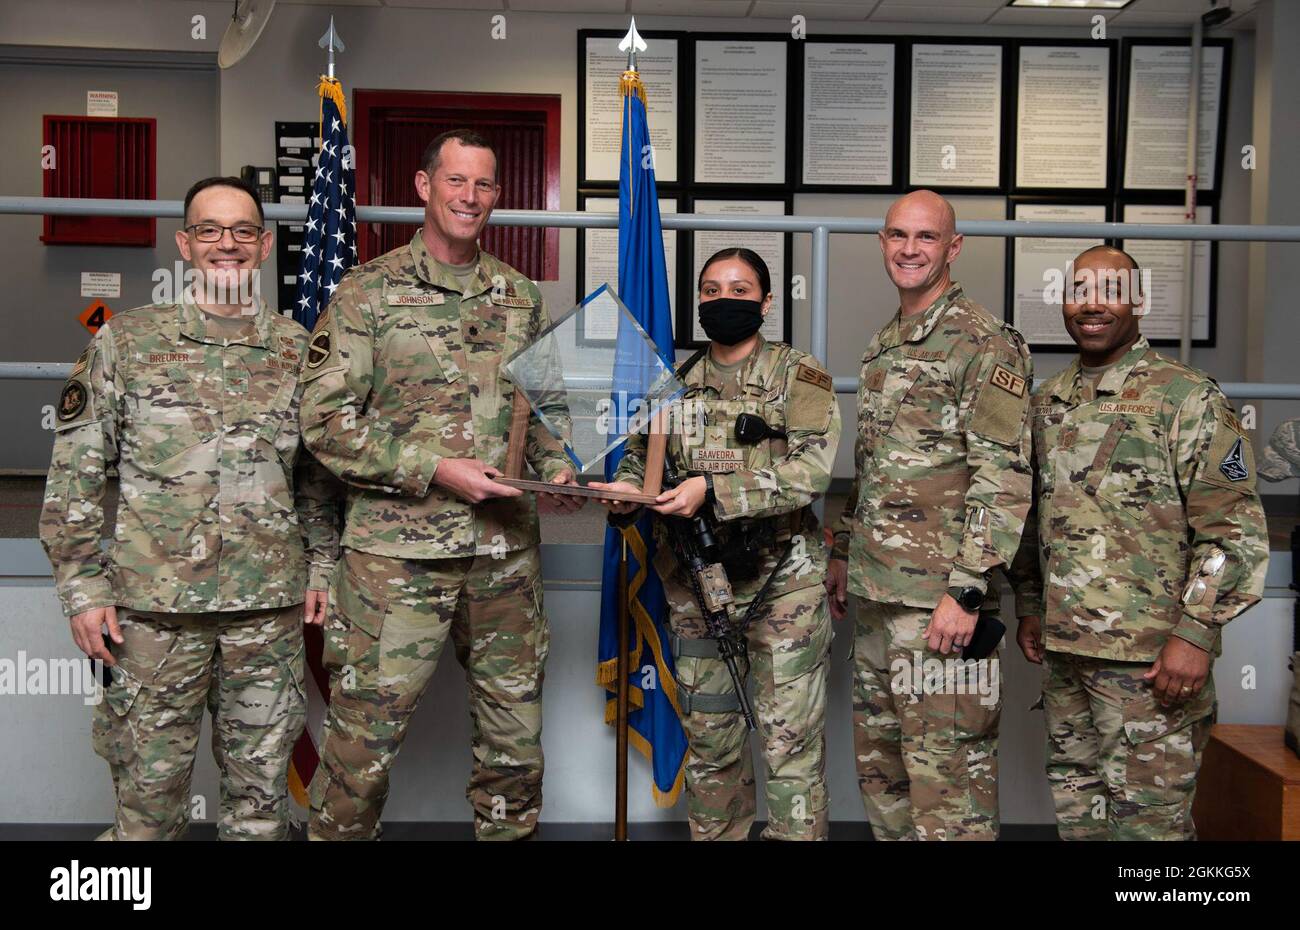 PETERSON AIR FORCE BASE, Colo. – Members of the 21st Security Forces Squadron receive the 2021 U.S. Space Force Best Large Unit Award at Peterson Air Force Base, Colorado, May 17, 2021. From left, U.S. Air Force Col. Theodore Breuker, Space Operations Command Security Forces division chief; U.S. Air Force Lt. Col. Rob Johnson, 21st SFS commander; U.S. Air Force Airman 1st Class Angelica Saavedra, 21st SFS installation entry controller; U.S. Air Force Chief Master Sgt. Joseph Cook, SpOC SFS manager; U.S. Air Force Chief Master Sgt. Samel Brown, SpOC SFS manager. The award is reserved for large Stock Photo